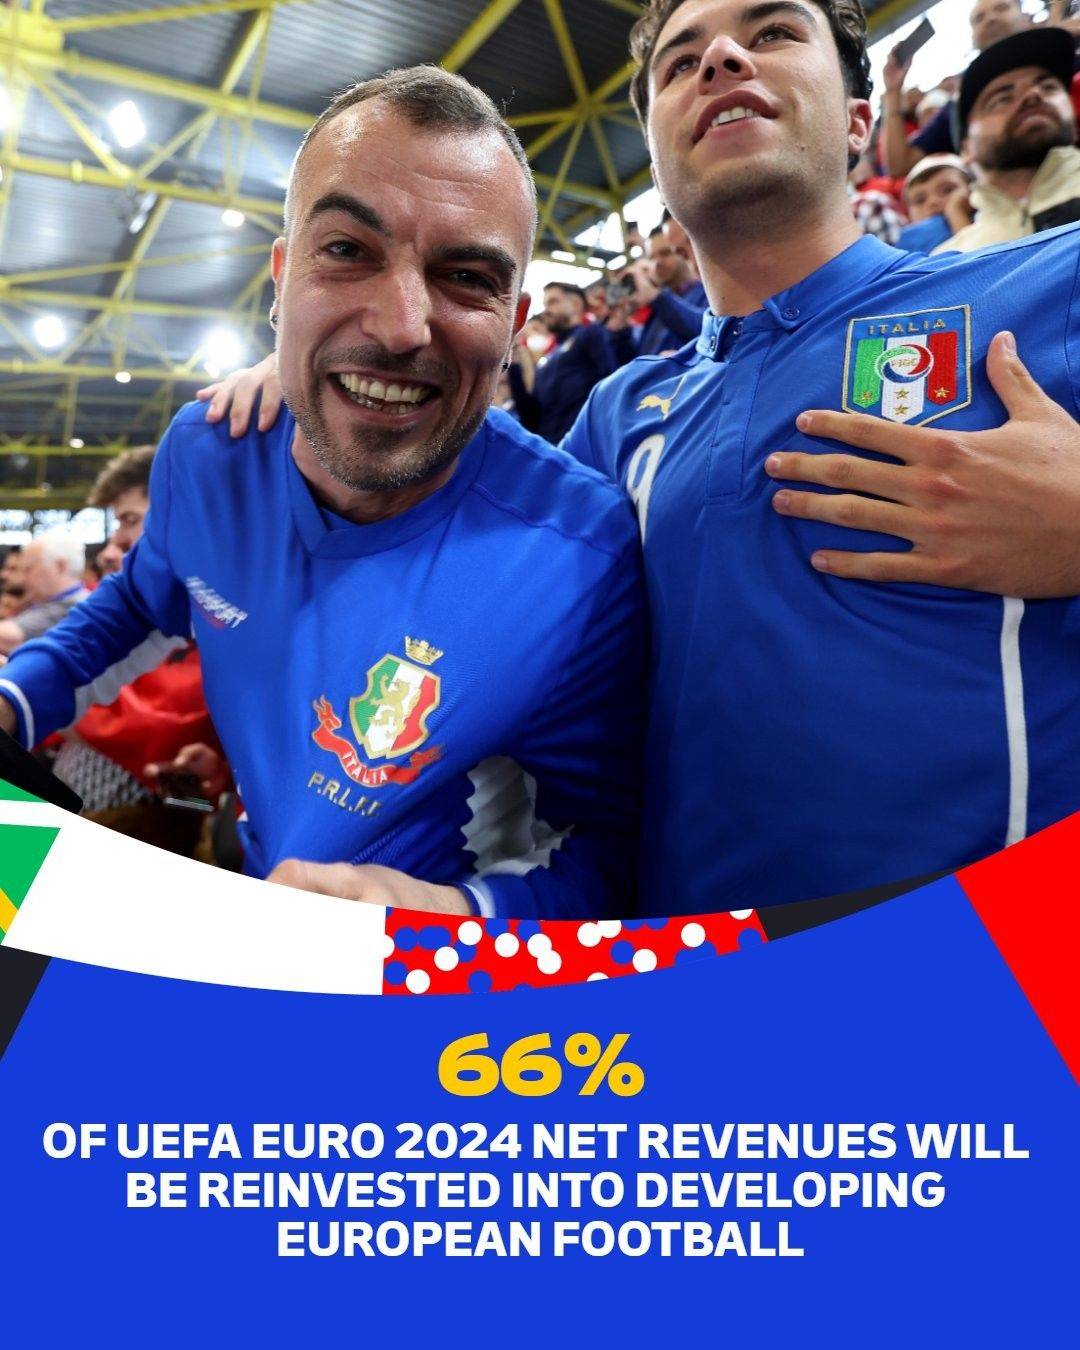 Official: 66% of this Euro Cup's revenue to be reinvested in European football development